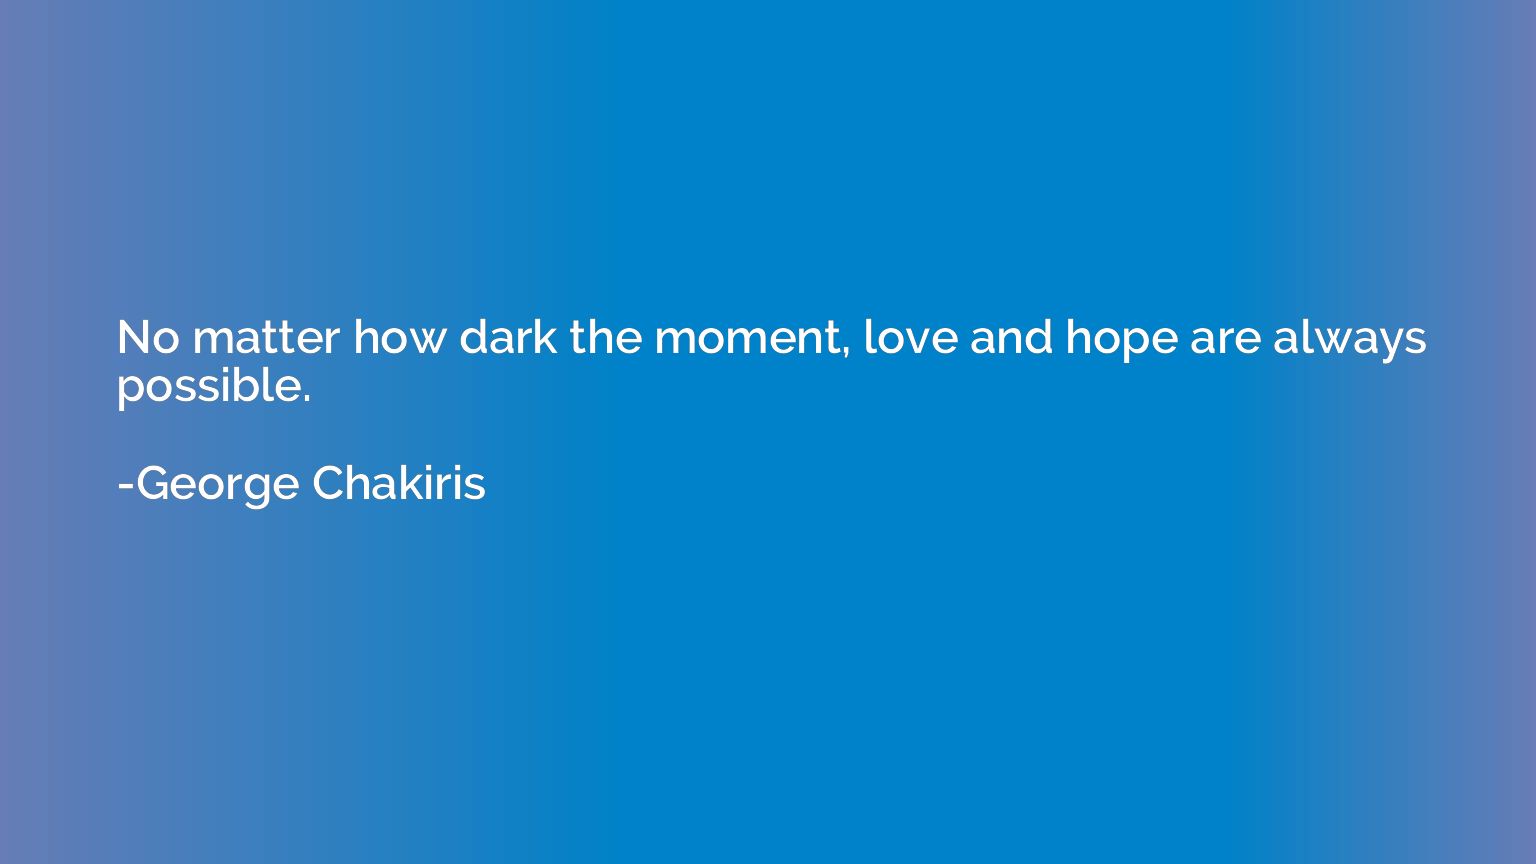 No matter how dark the moment, love and hope are always poss